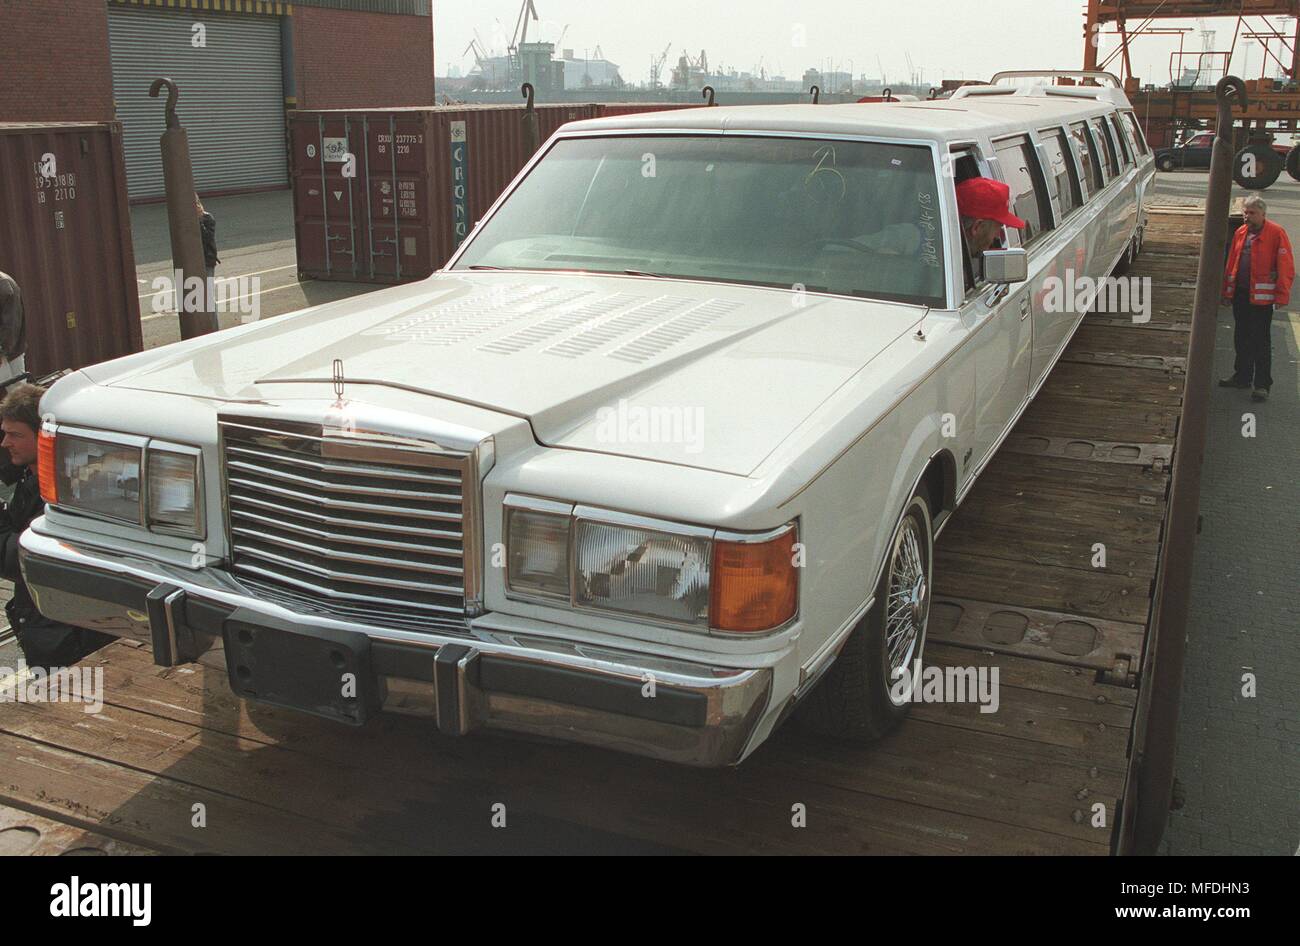 The longest limousine in the world approved for road traffic will be loaded onto a railway carriage in Bremerhaven on 16.4.1996 and will be transported by freight train to Frankfurt. The 14-meter-long, white car of the Lincoln brand arrived on April 13 from America in the seaside city. The Danger offers space for up to 16 people and is equipped with two whirlpools, four bars, a laser light show and a bedroom in the back area. The car, which is listed in the Guinness Book of Records and already 'inwirkte' in a Walt Disney film, can be rented in future by interested parties including chauffeur f Stock Photo